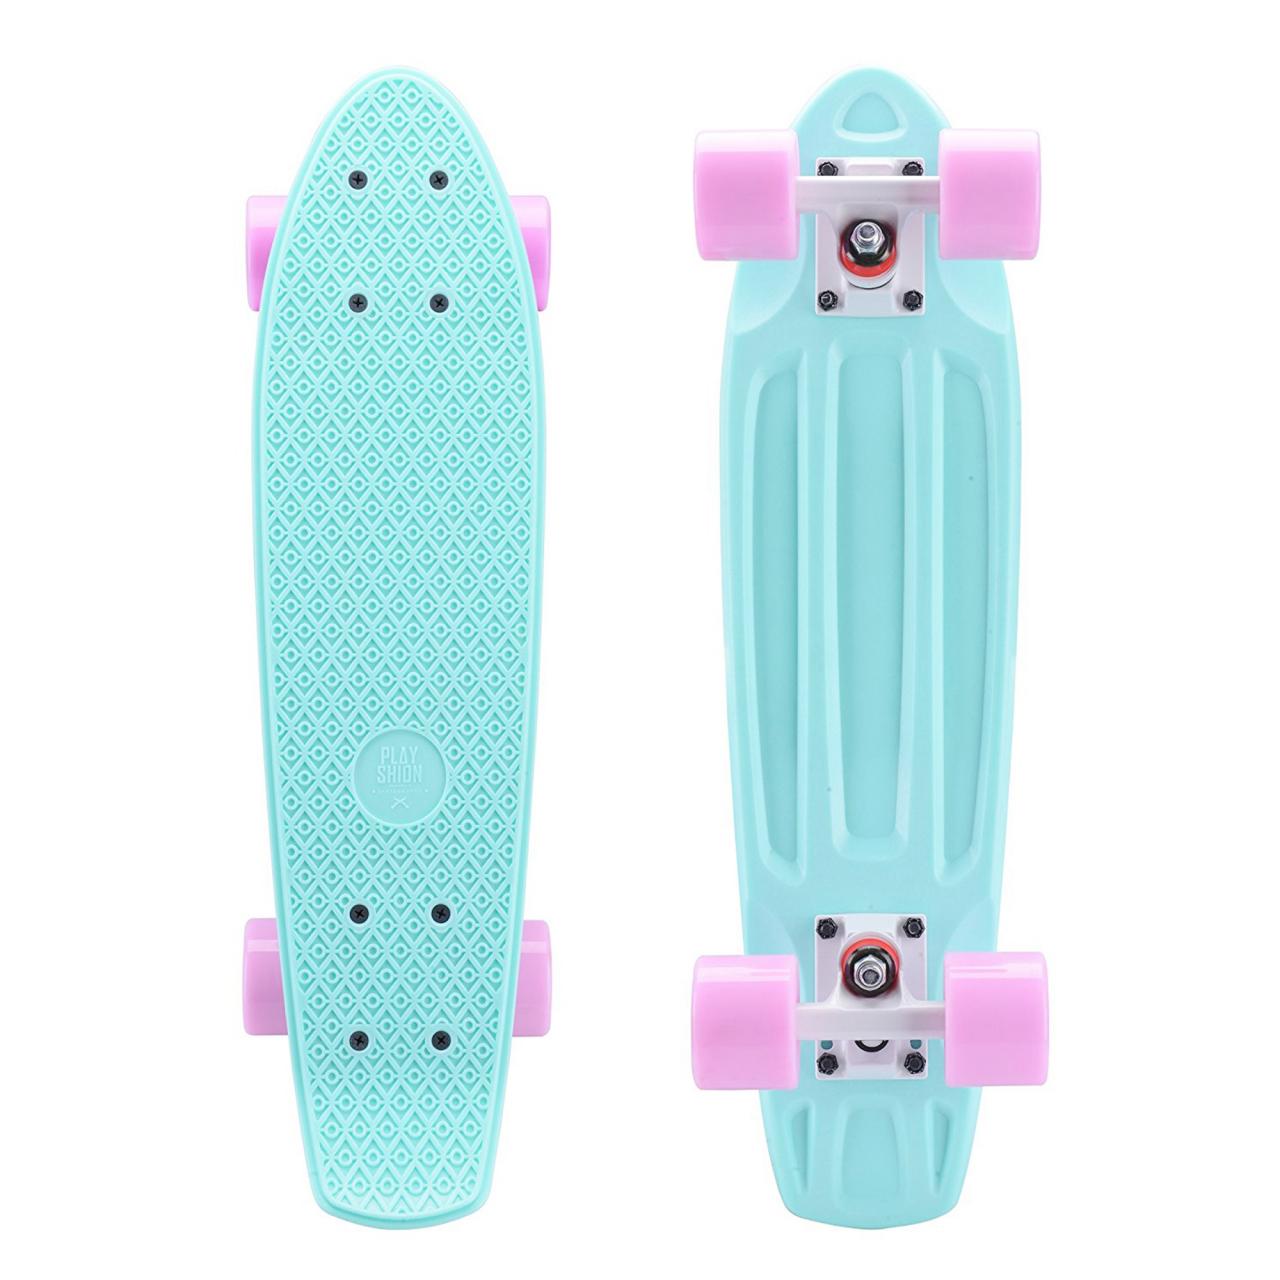 Buy Playshion 31x8 Complete Skateboard for Kids and Beginners Online in  Hong Kong. B07WNGTKKX